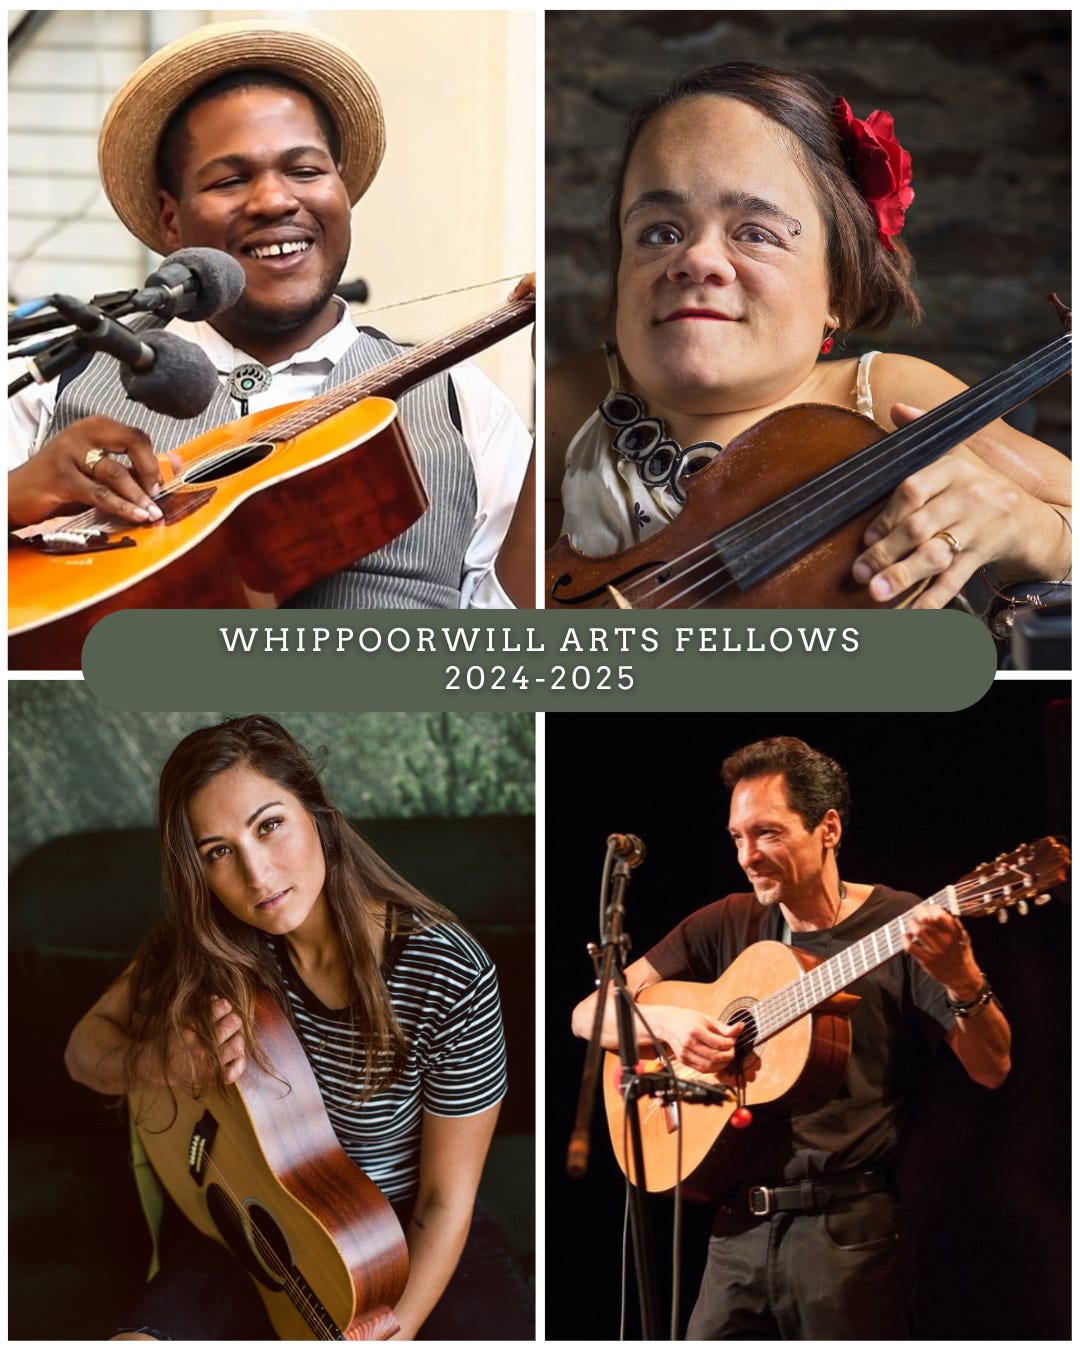 A picture of the 4 Whippoorwill Arts fellows, Jerron, Gaelynn, Angie and Abel.